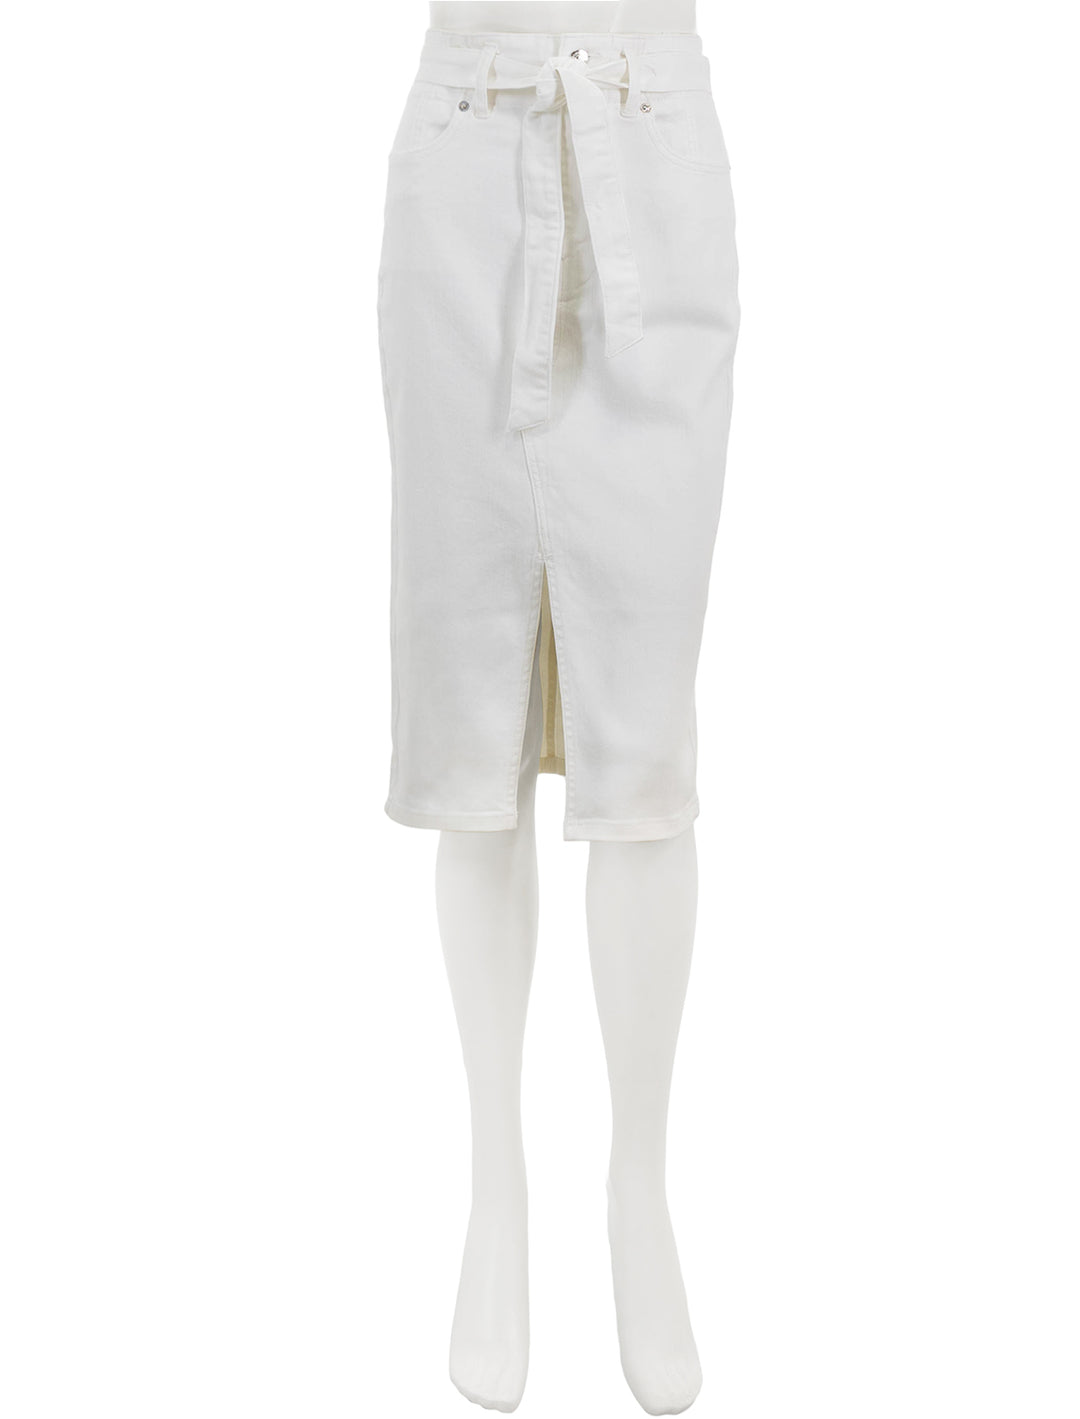 Front view of Veronica Beard's nazia jean skirt in white.